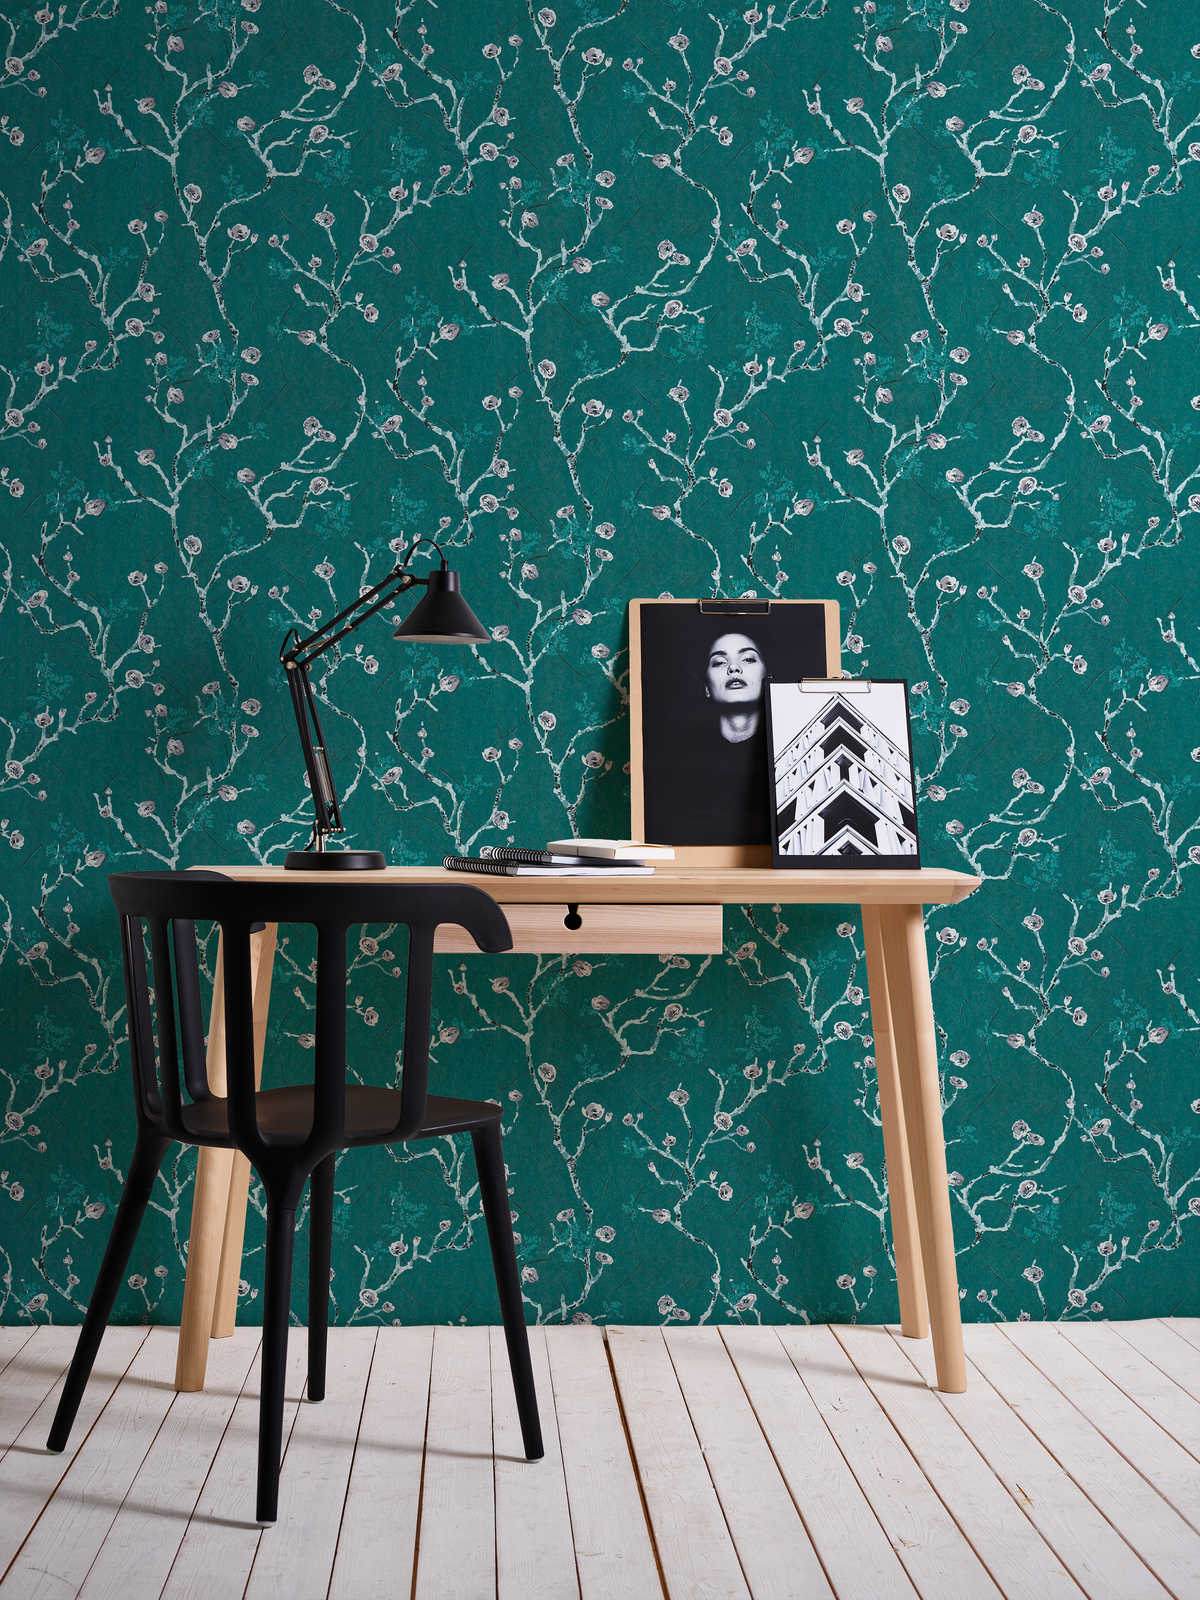             Dark green wallpaper with flowers motif in Asia style
        